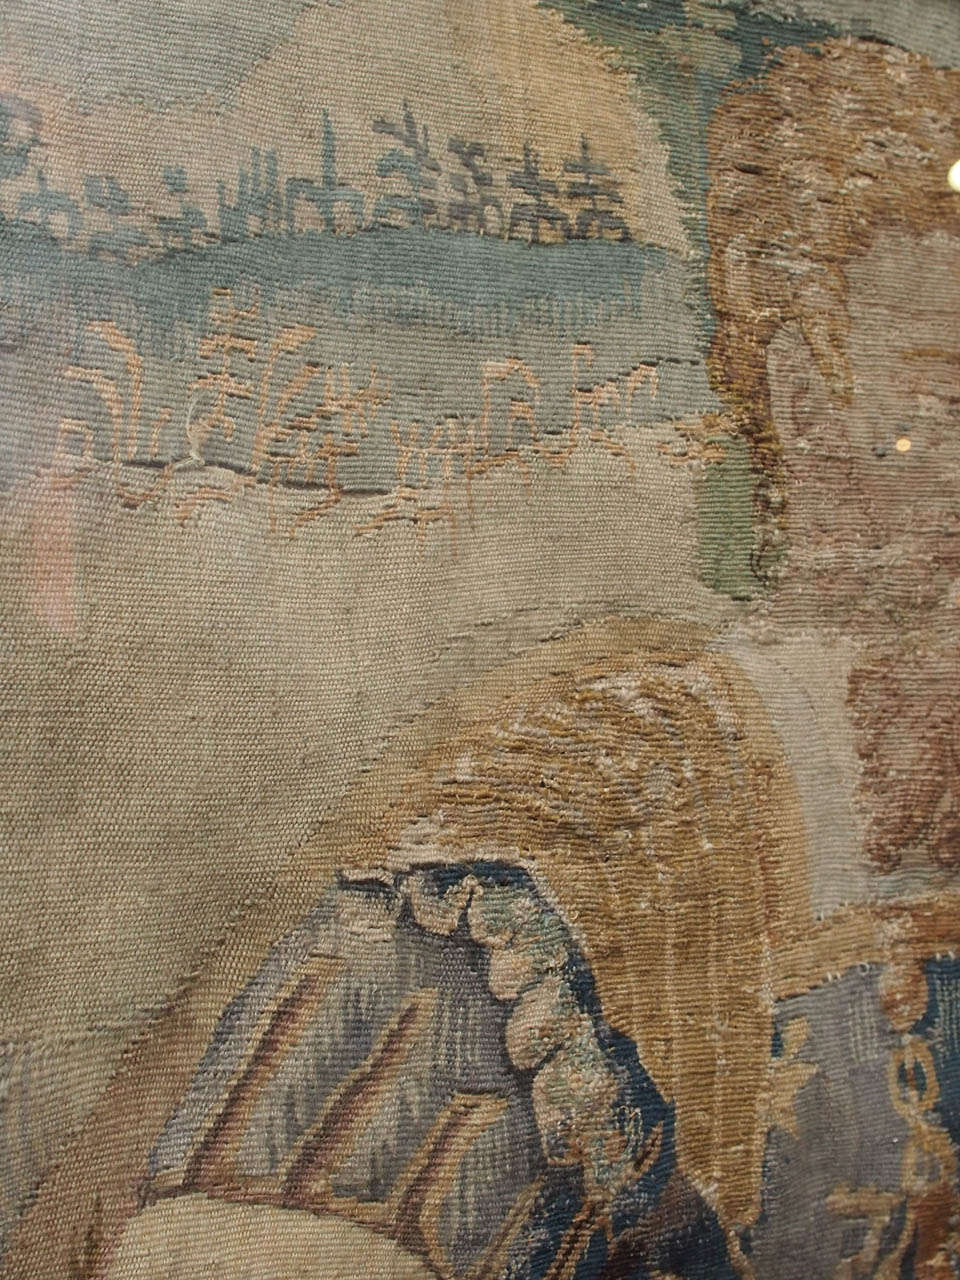 17th C. Flemish Tapestry Fragment in 19th Century Frame 2